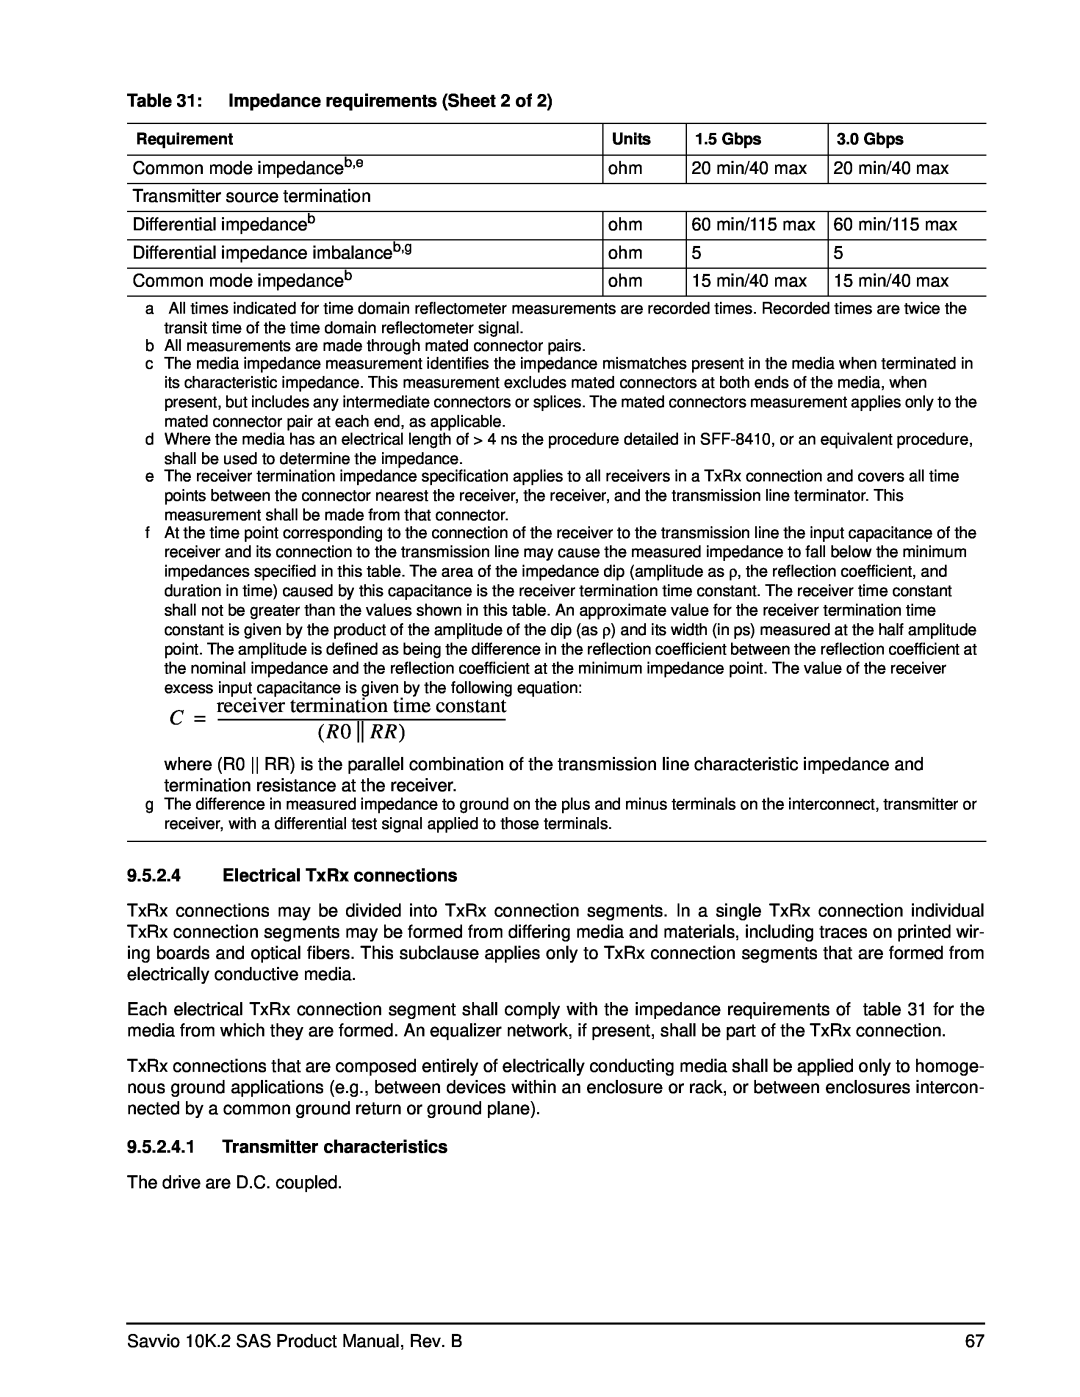 Seagate ST9146802SS R0 RR, Impedance requirements Sheet 2 of, Electrical TxRx connections, Transmitter characteristics 